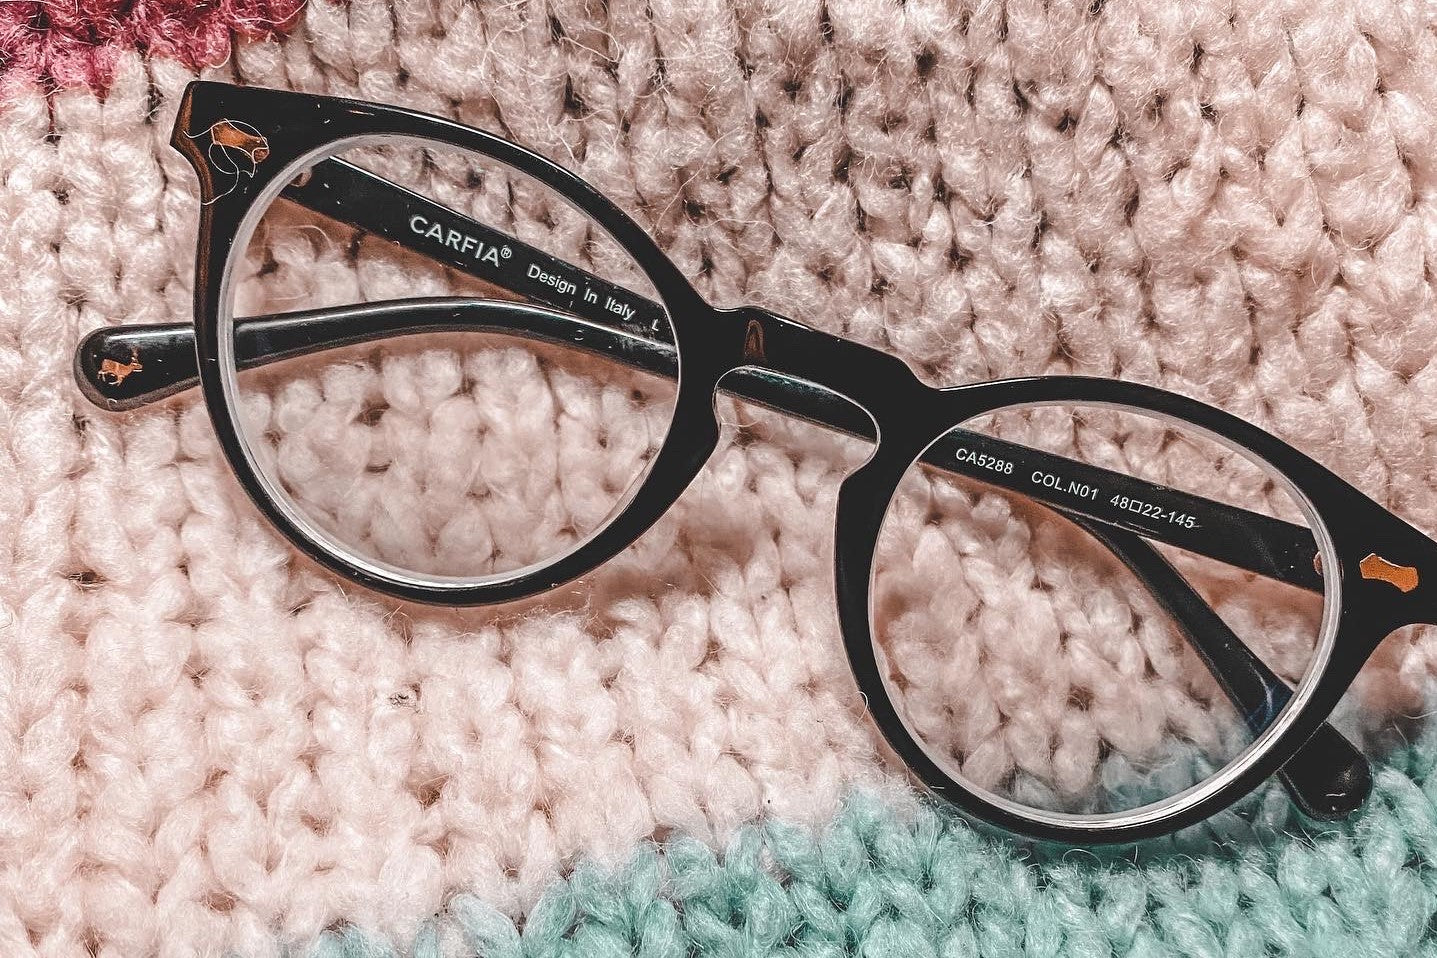 Is There Much Difference Between 1.5 And 1.75 Reading Glasses? | KOALAEYE OPTICAL